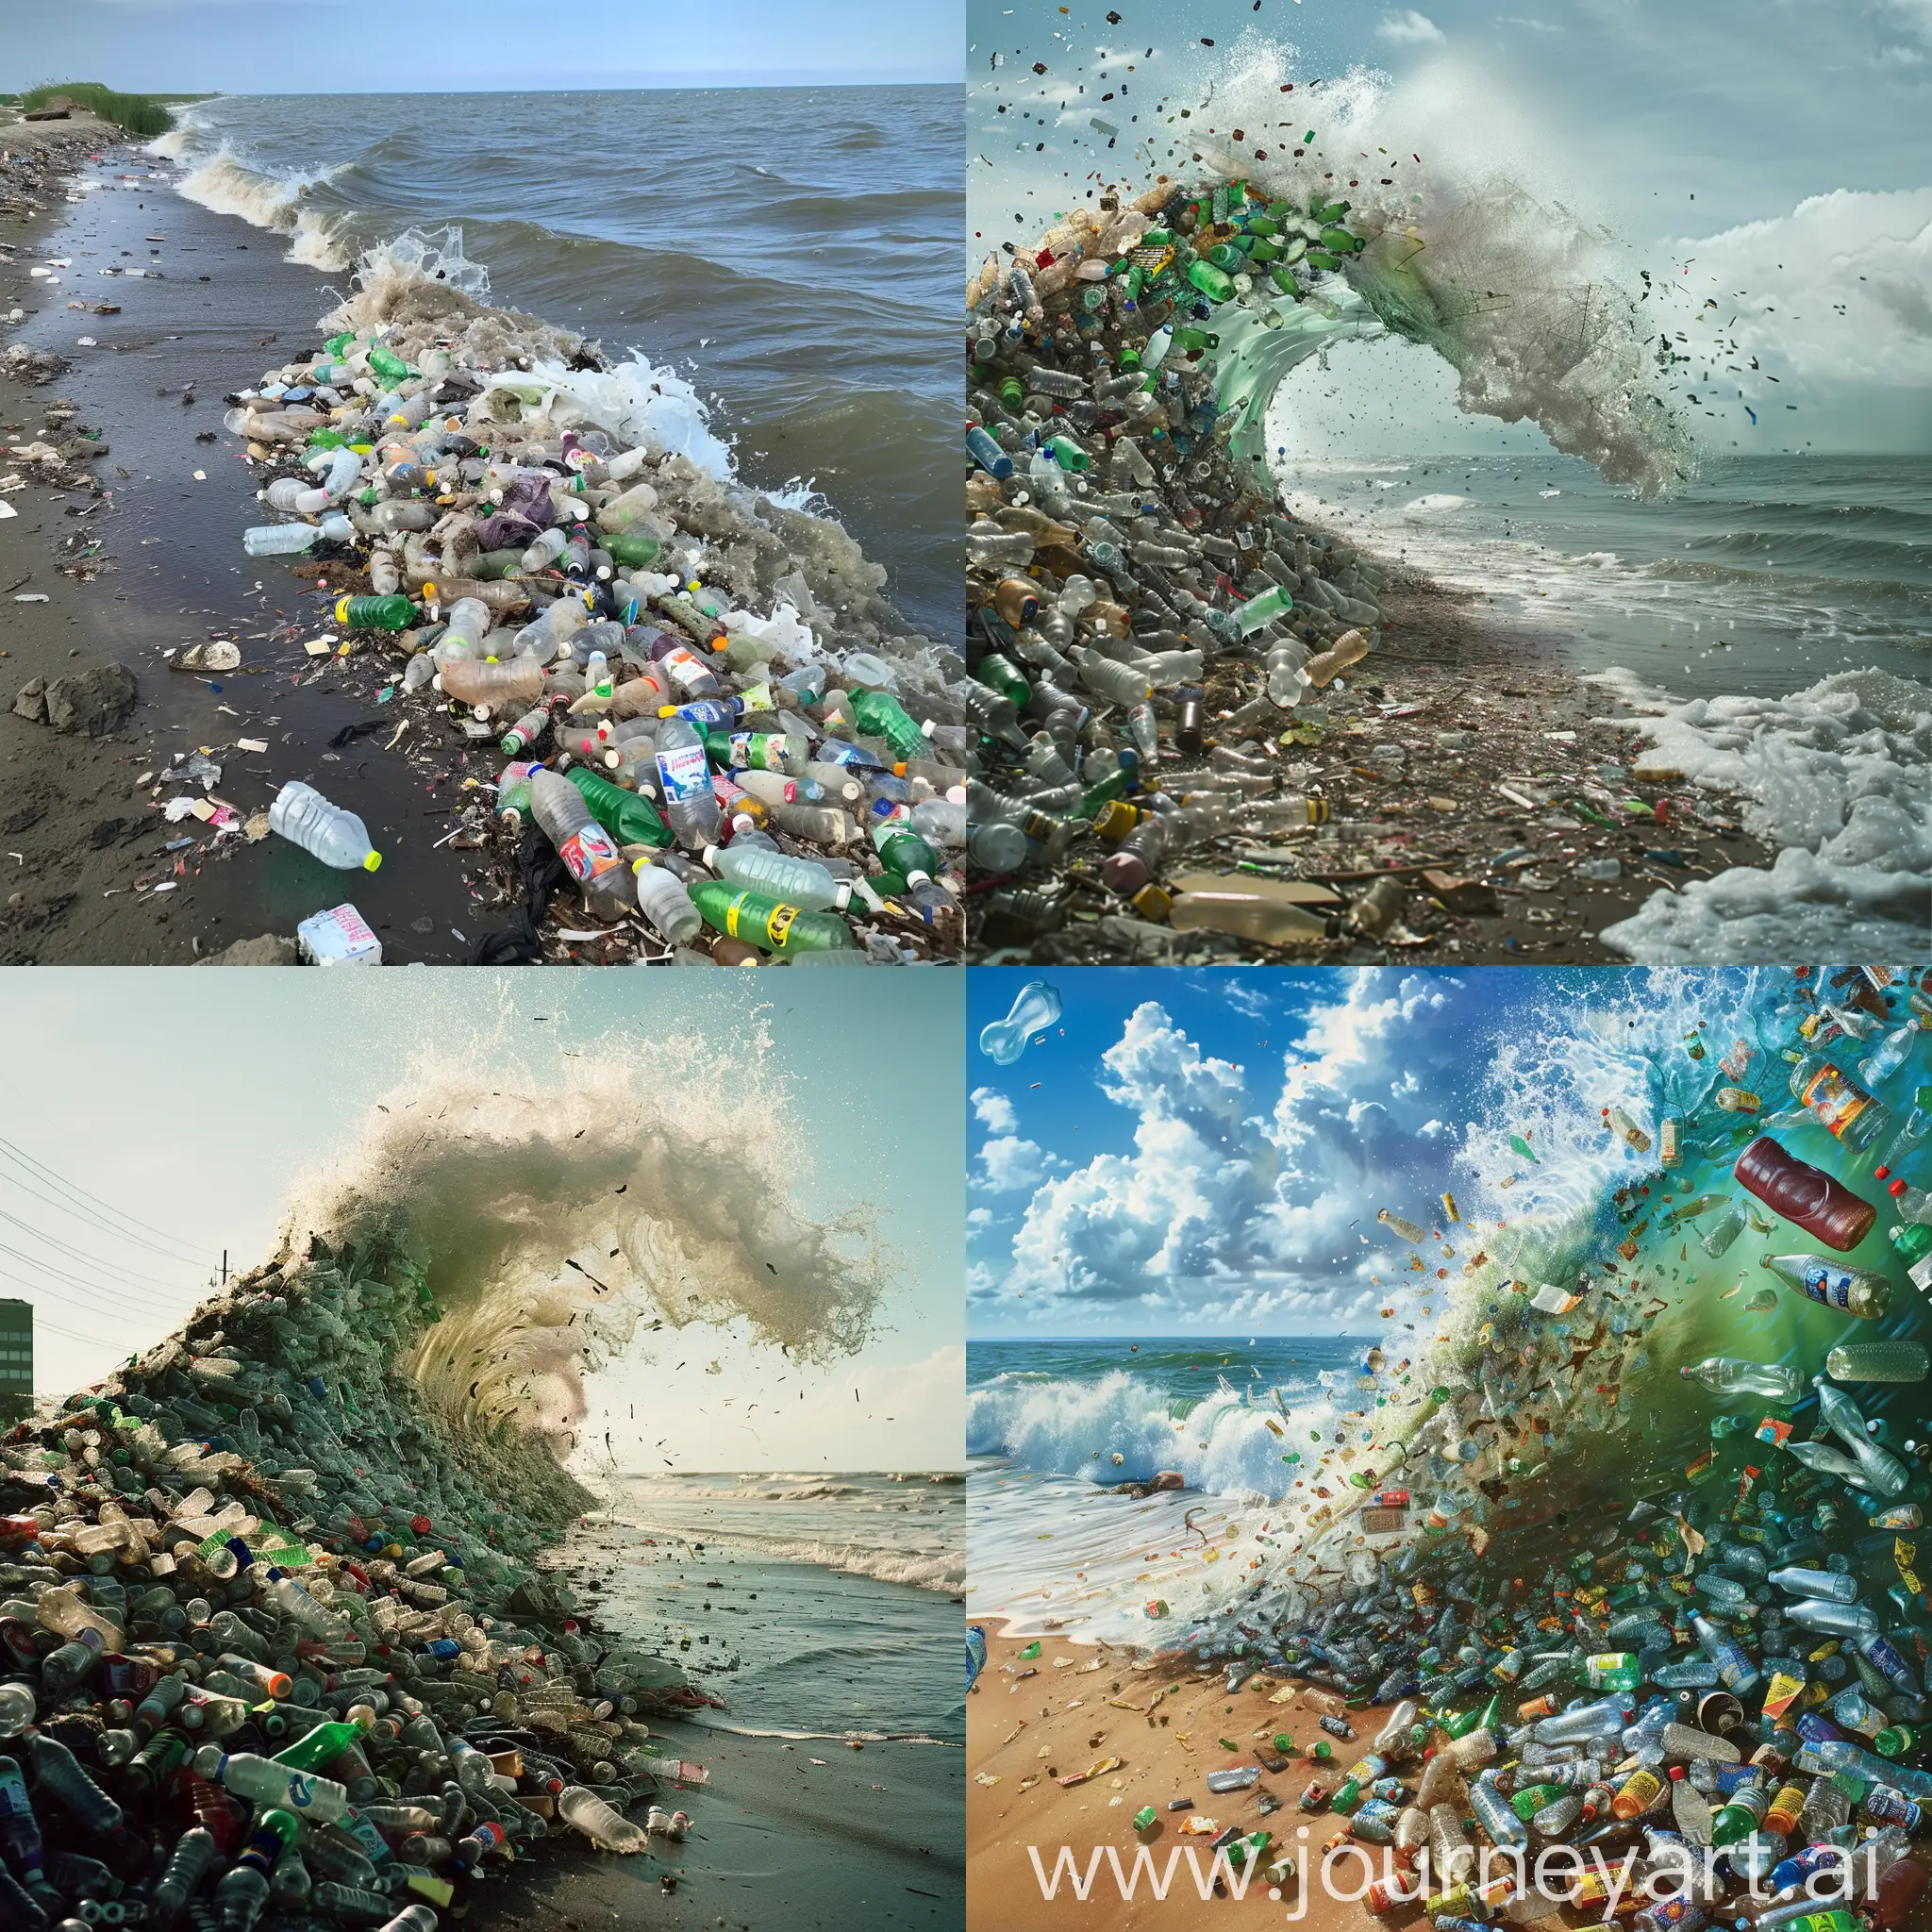 Ocean-Pollution-Crisis-Tsunami-of-Garbage-and-Plastic-Bottles